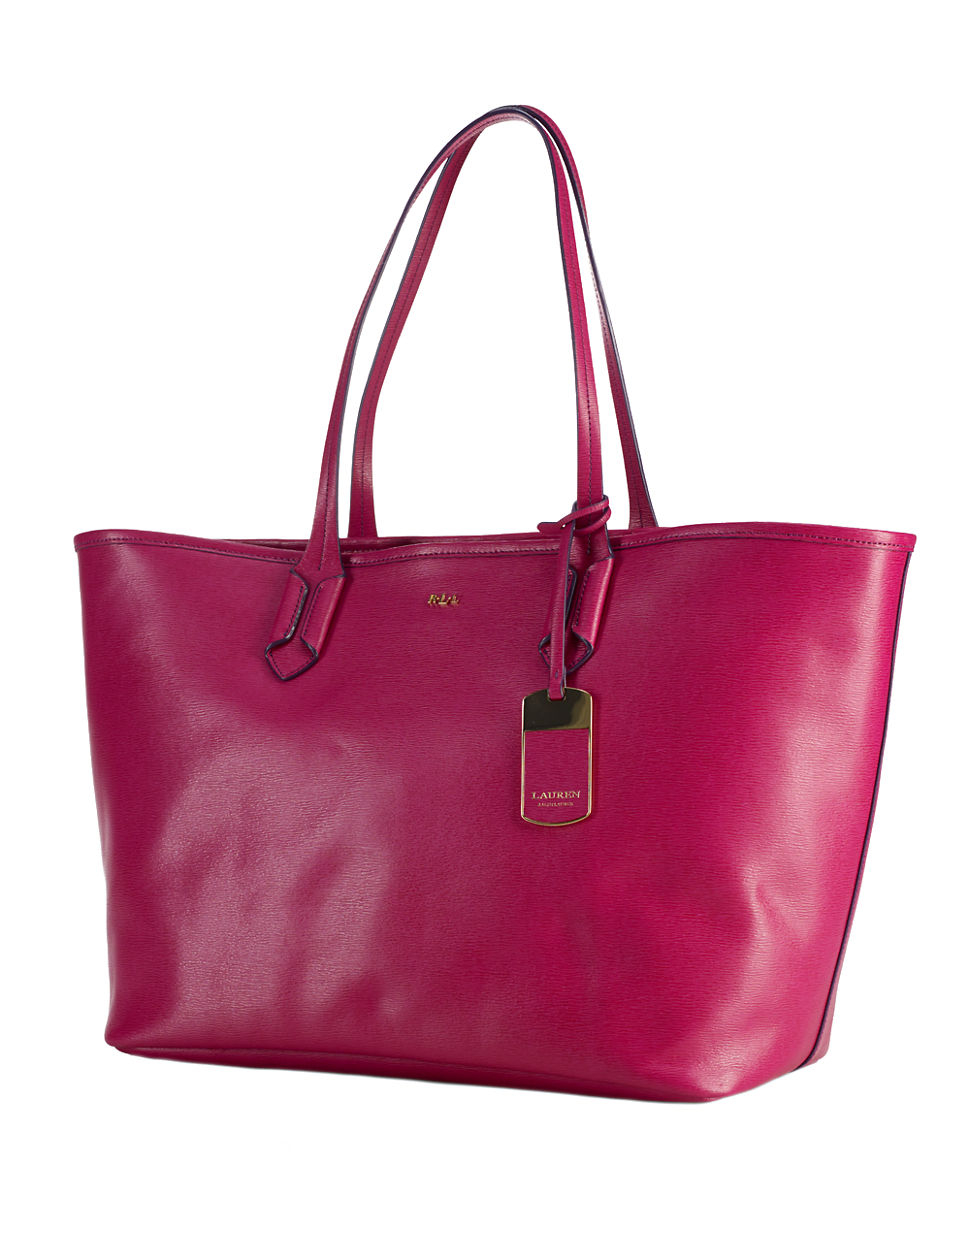 Lauren By Ralph Lauren Tate Classic Leather Tote Bag in Purple (PINK ...